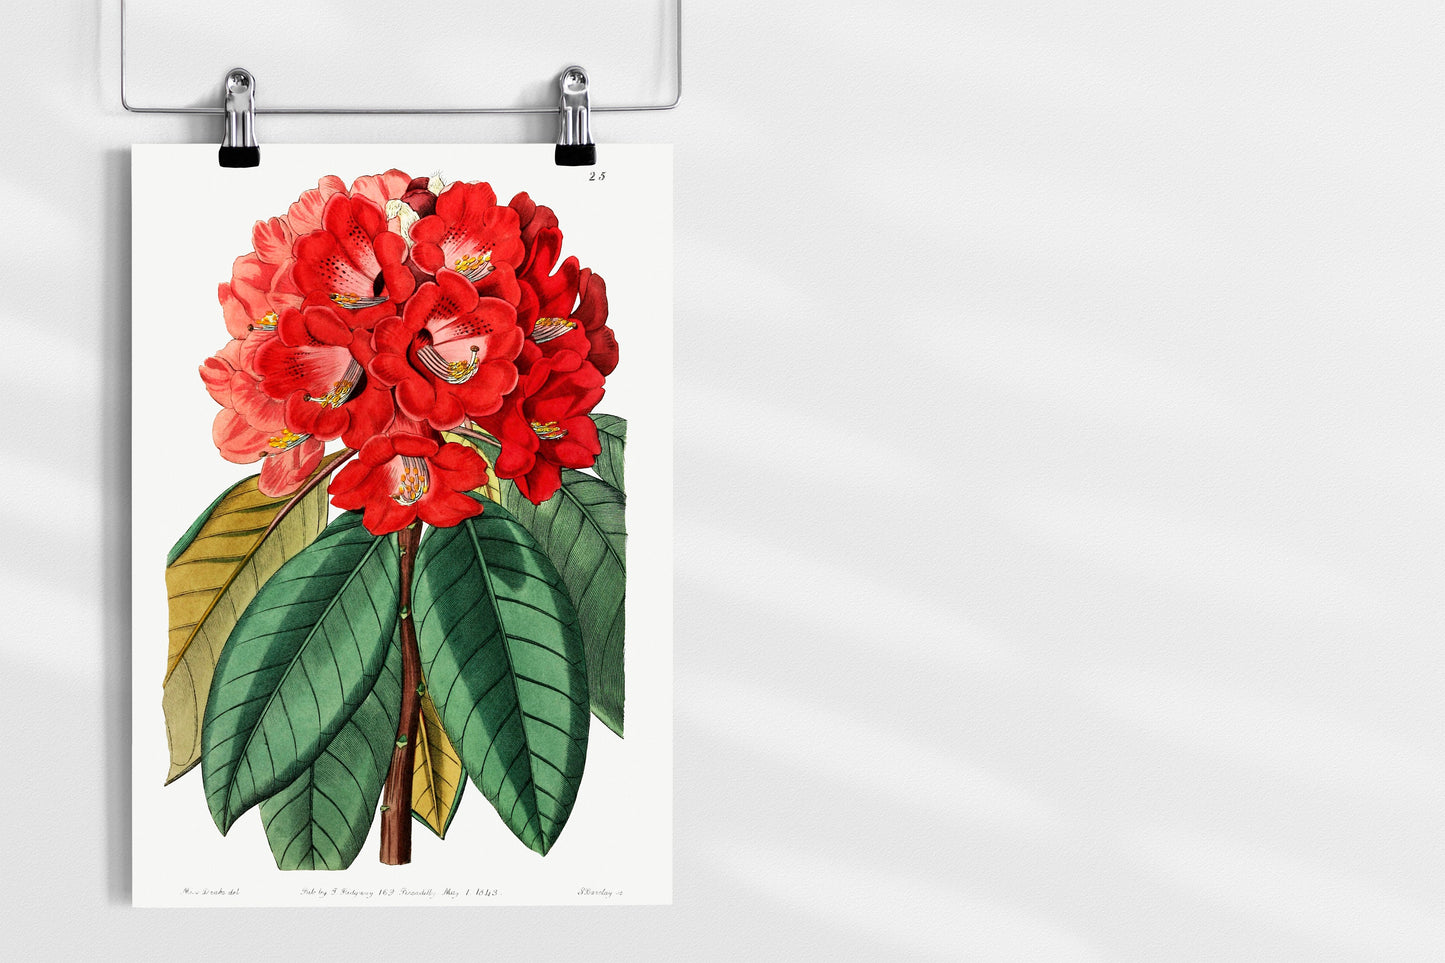 Rhododendron Rollissonii Plant Illustration Poster Print Wall Hanging Decor A4 A3 A2